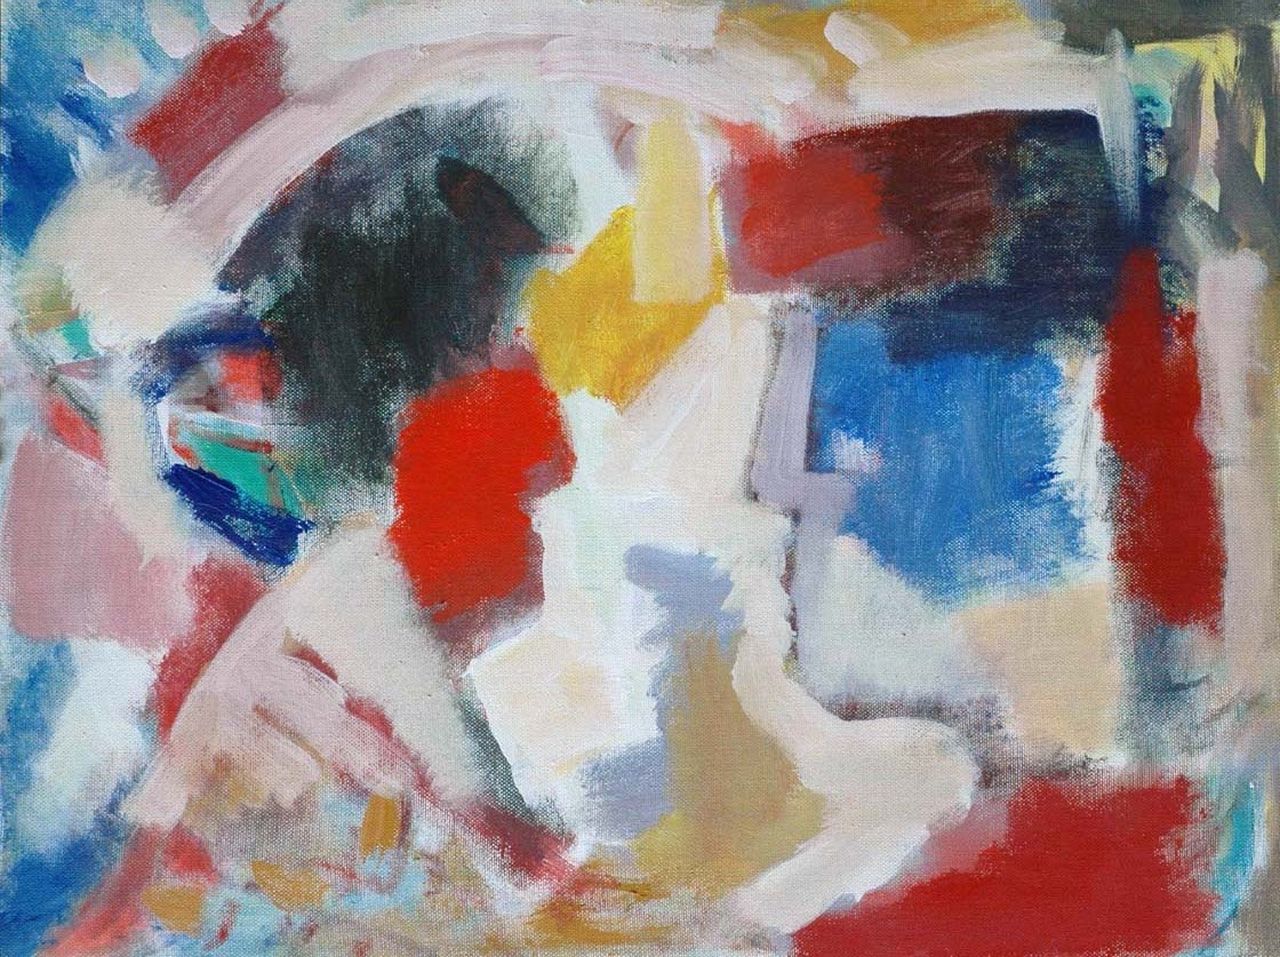 Boonstra K.  | Klaas Boonstra, Composition, oil on painter's board 61.3 x 81.0 cm, signed reverse